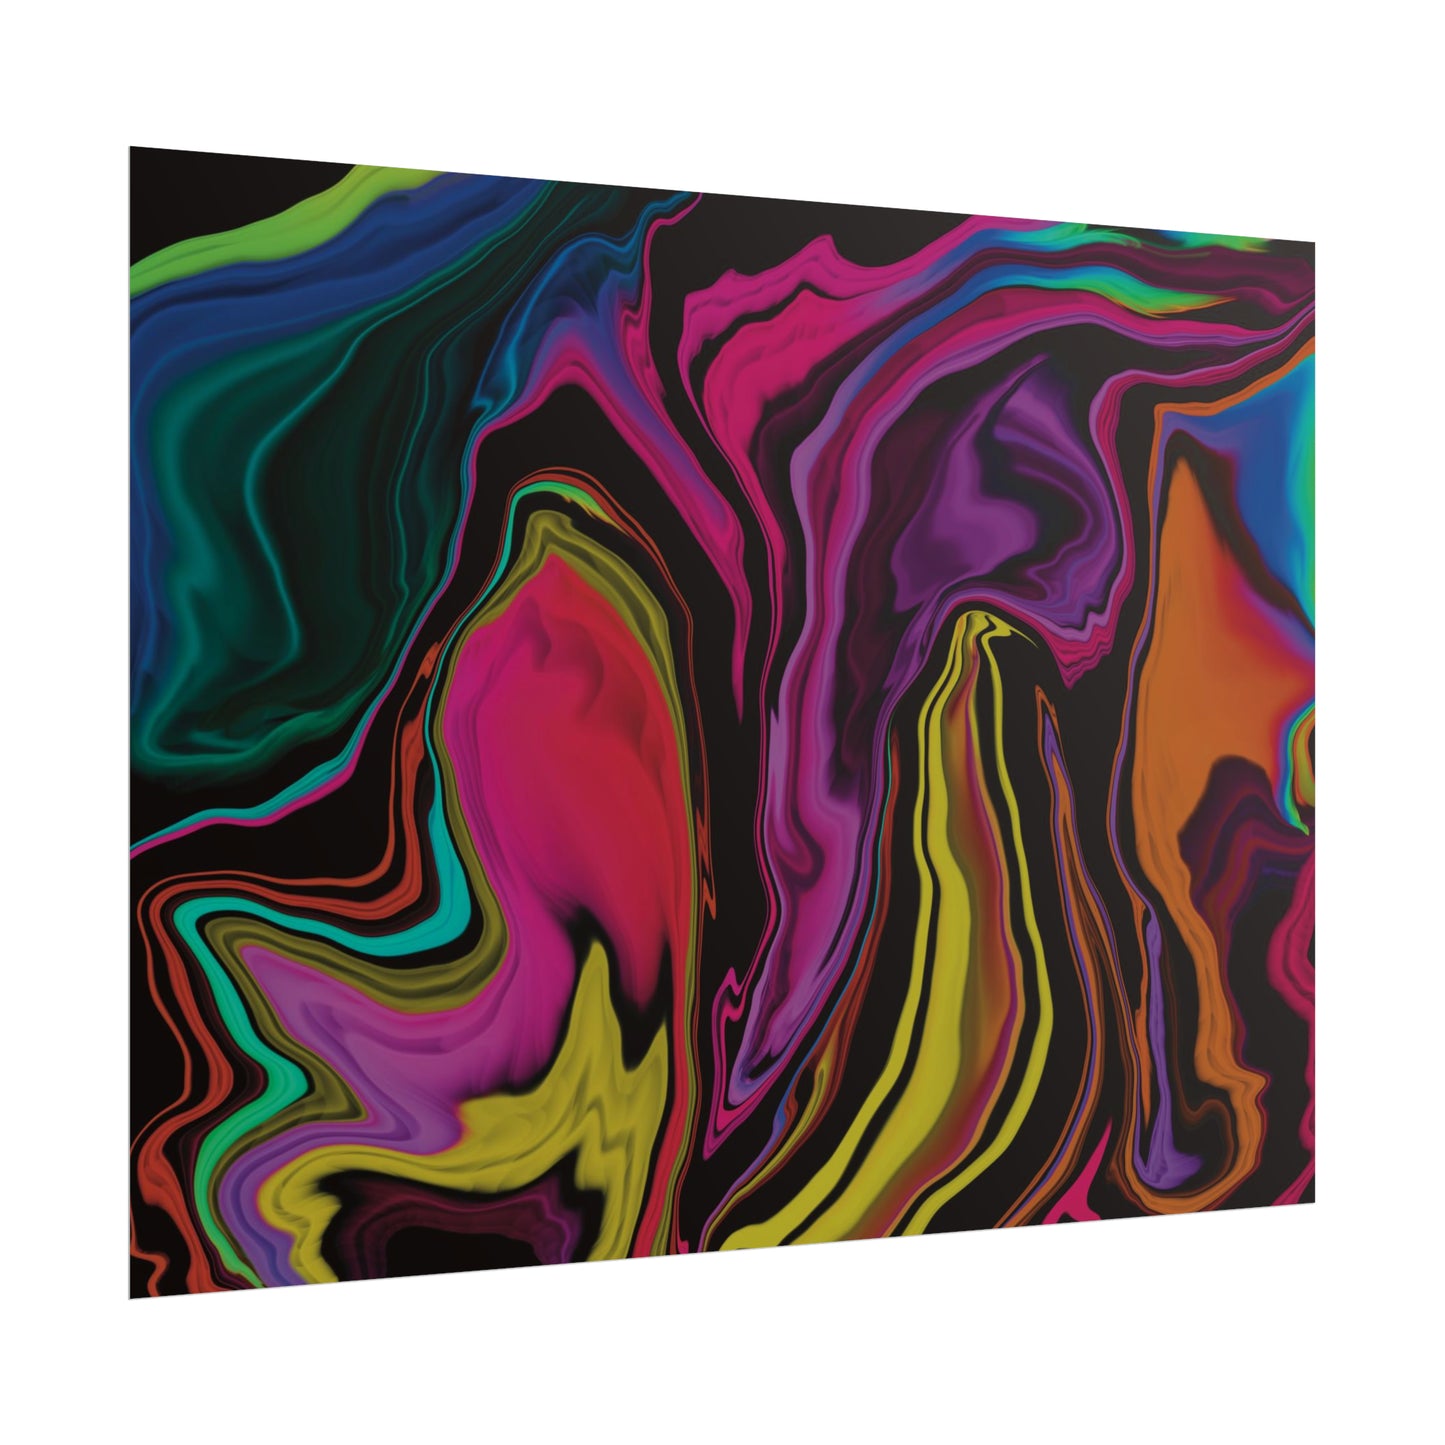 Unleash Your Power Fluid Painting Poster - Energetic Art for Self-Empowerment